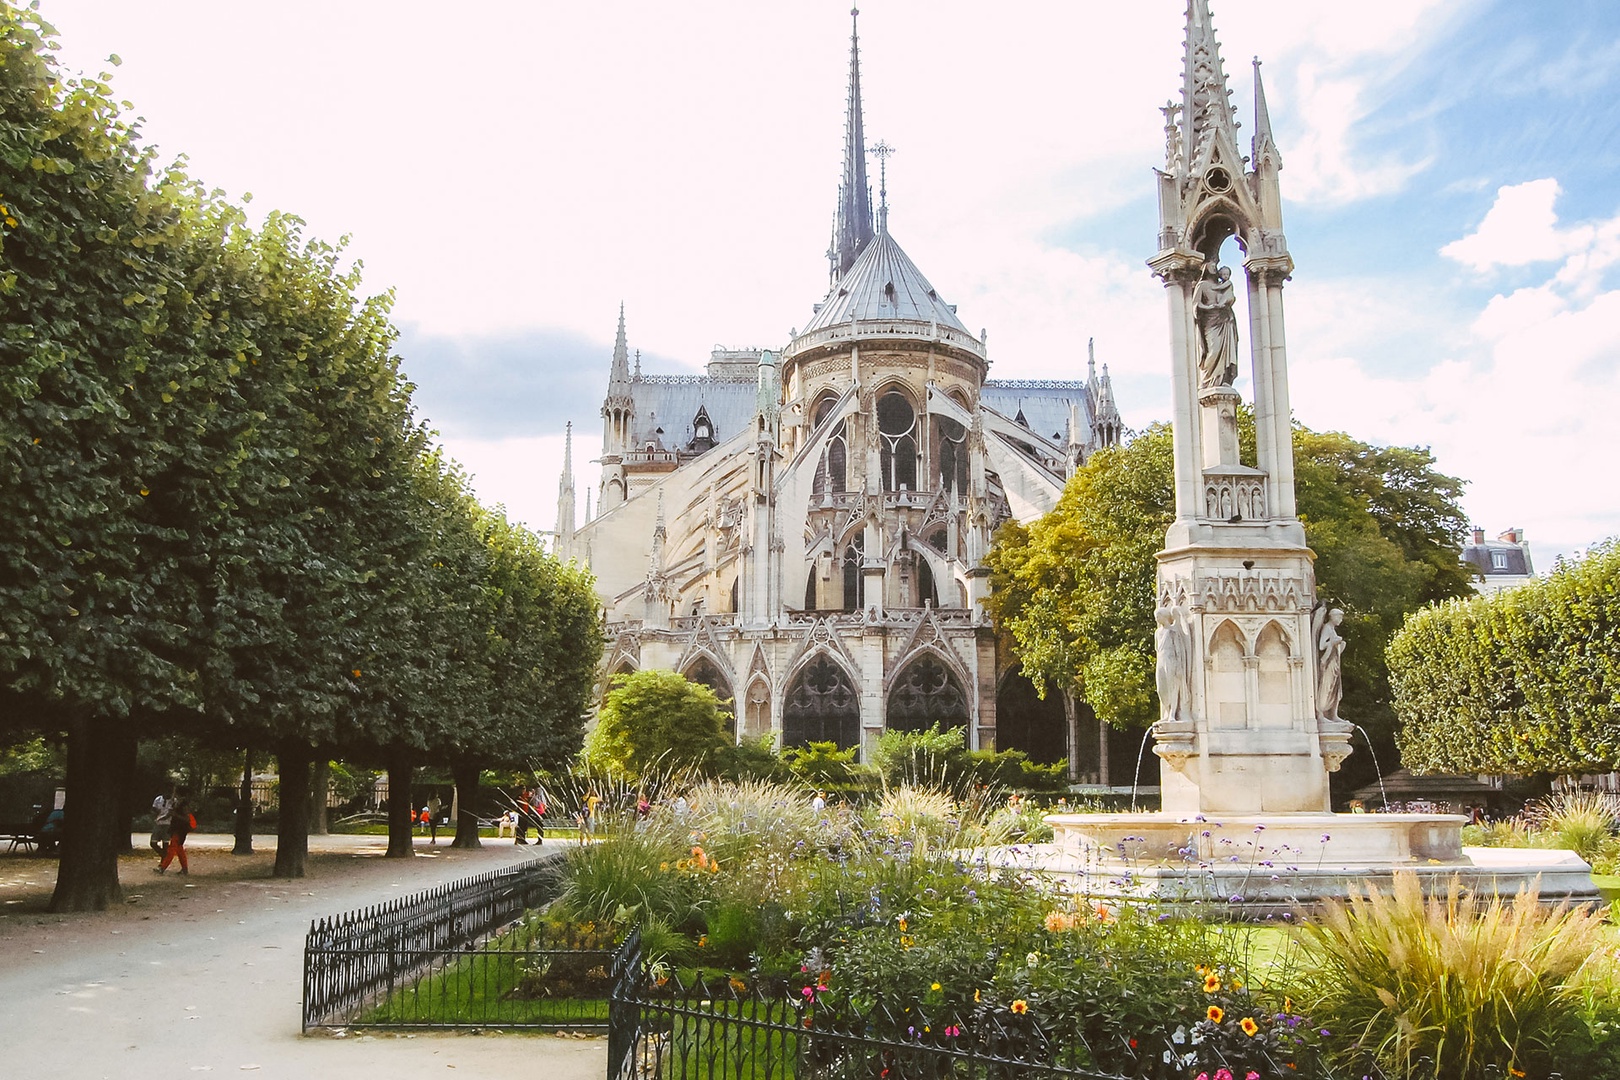 Walk over to the gardens of the Notre-Dame Cathedral.